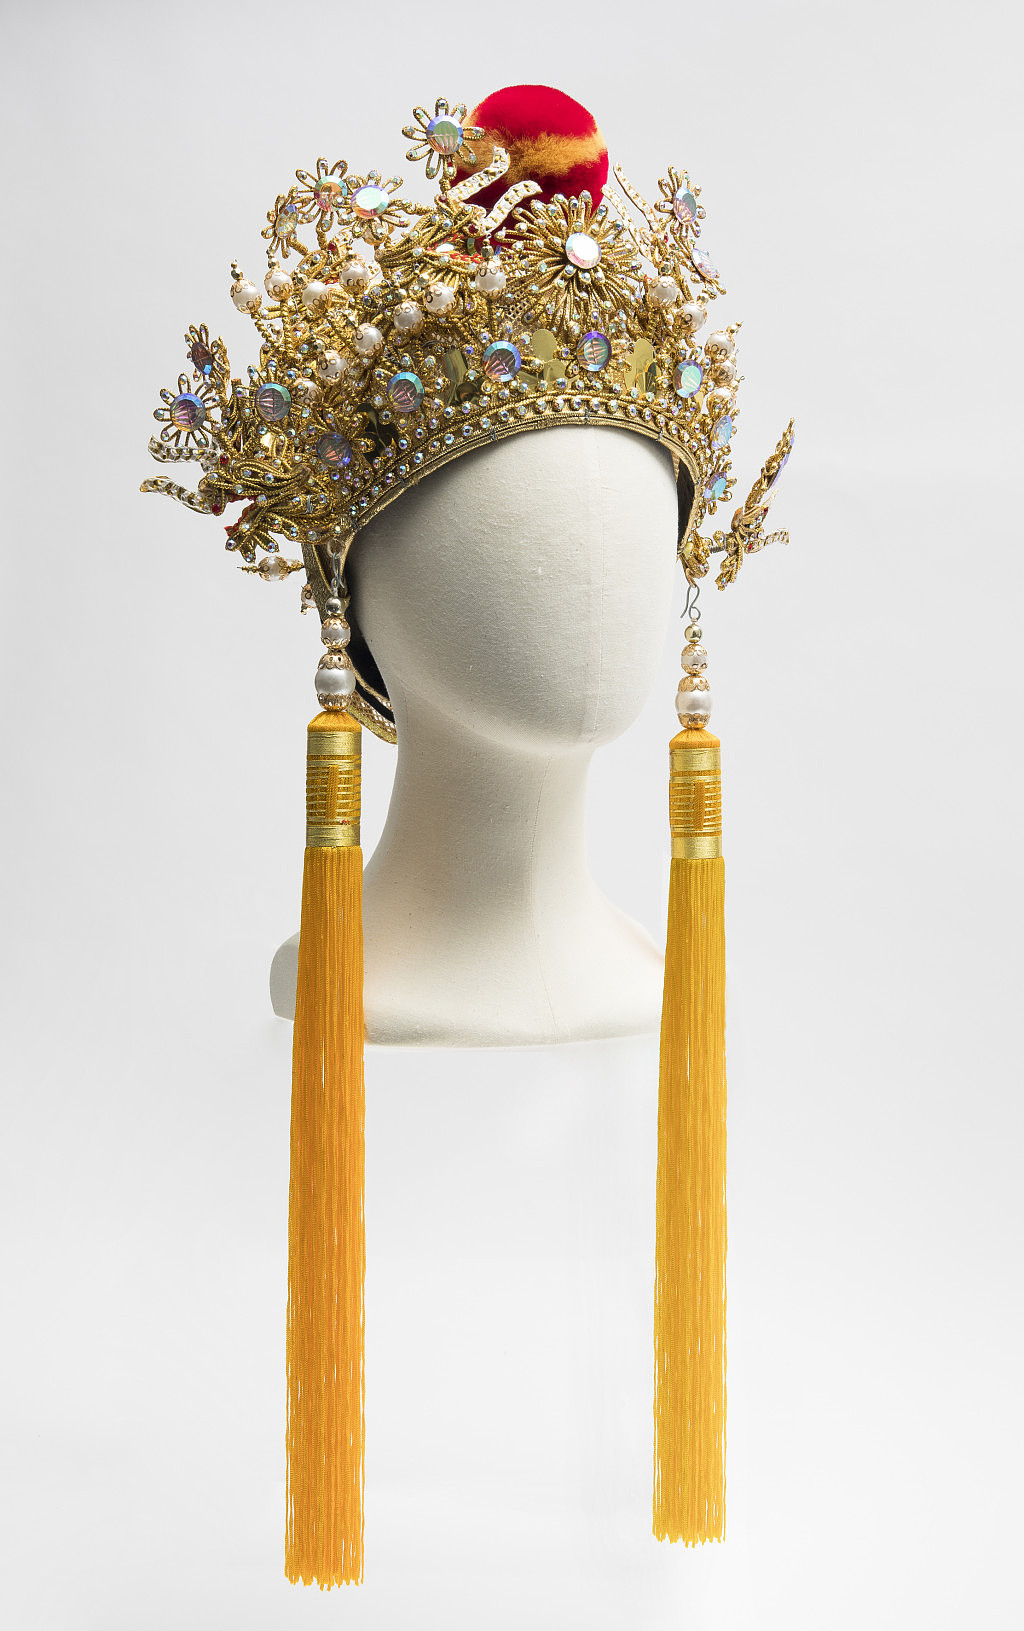 Golden headgear for an Emperor (c. 1970s-80s), fabric, metal, plastic, metallic mesh, faux jewels, pearls, tassels, Private collection.JPG,0